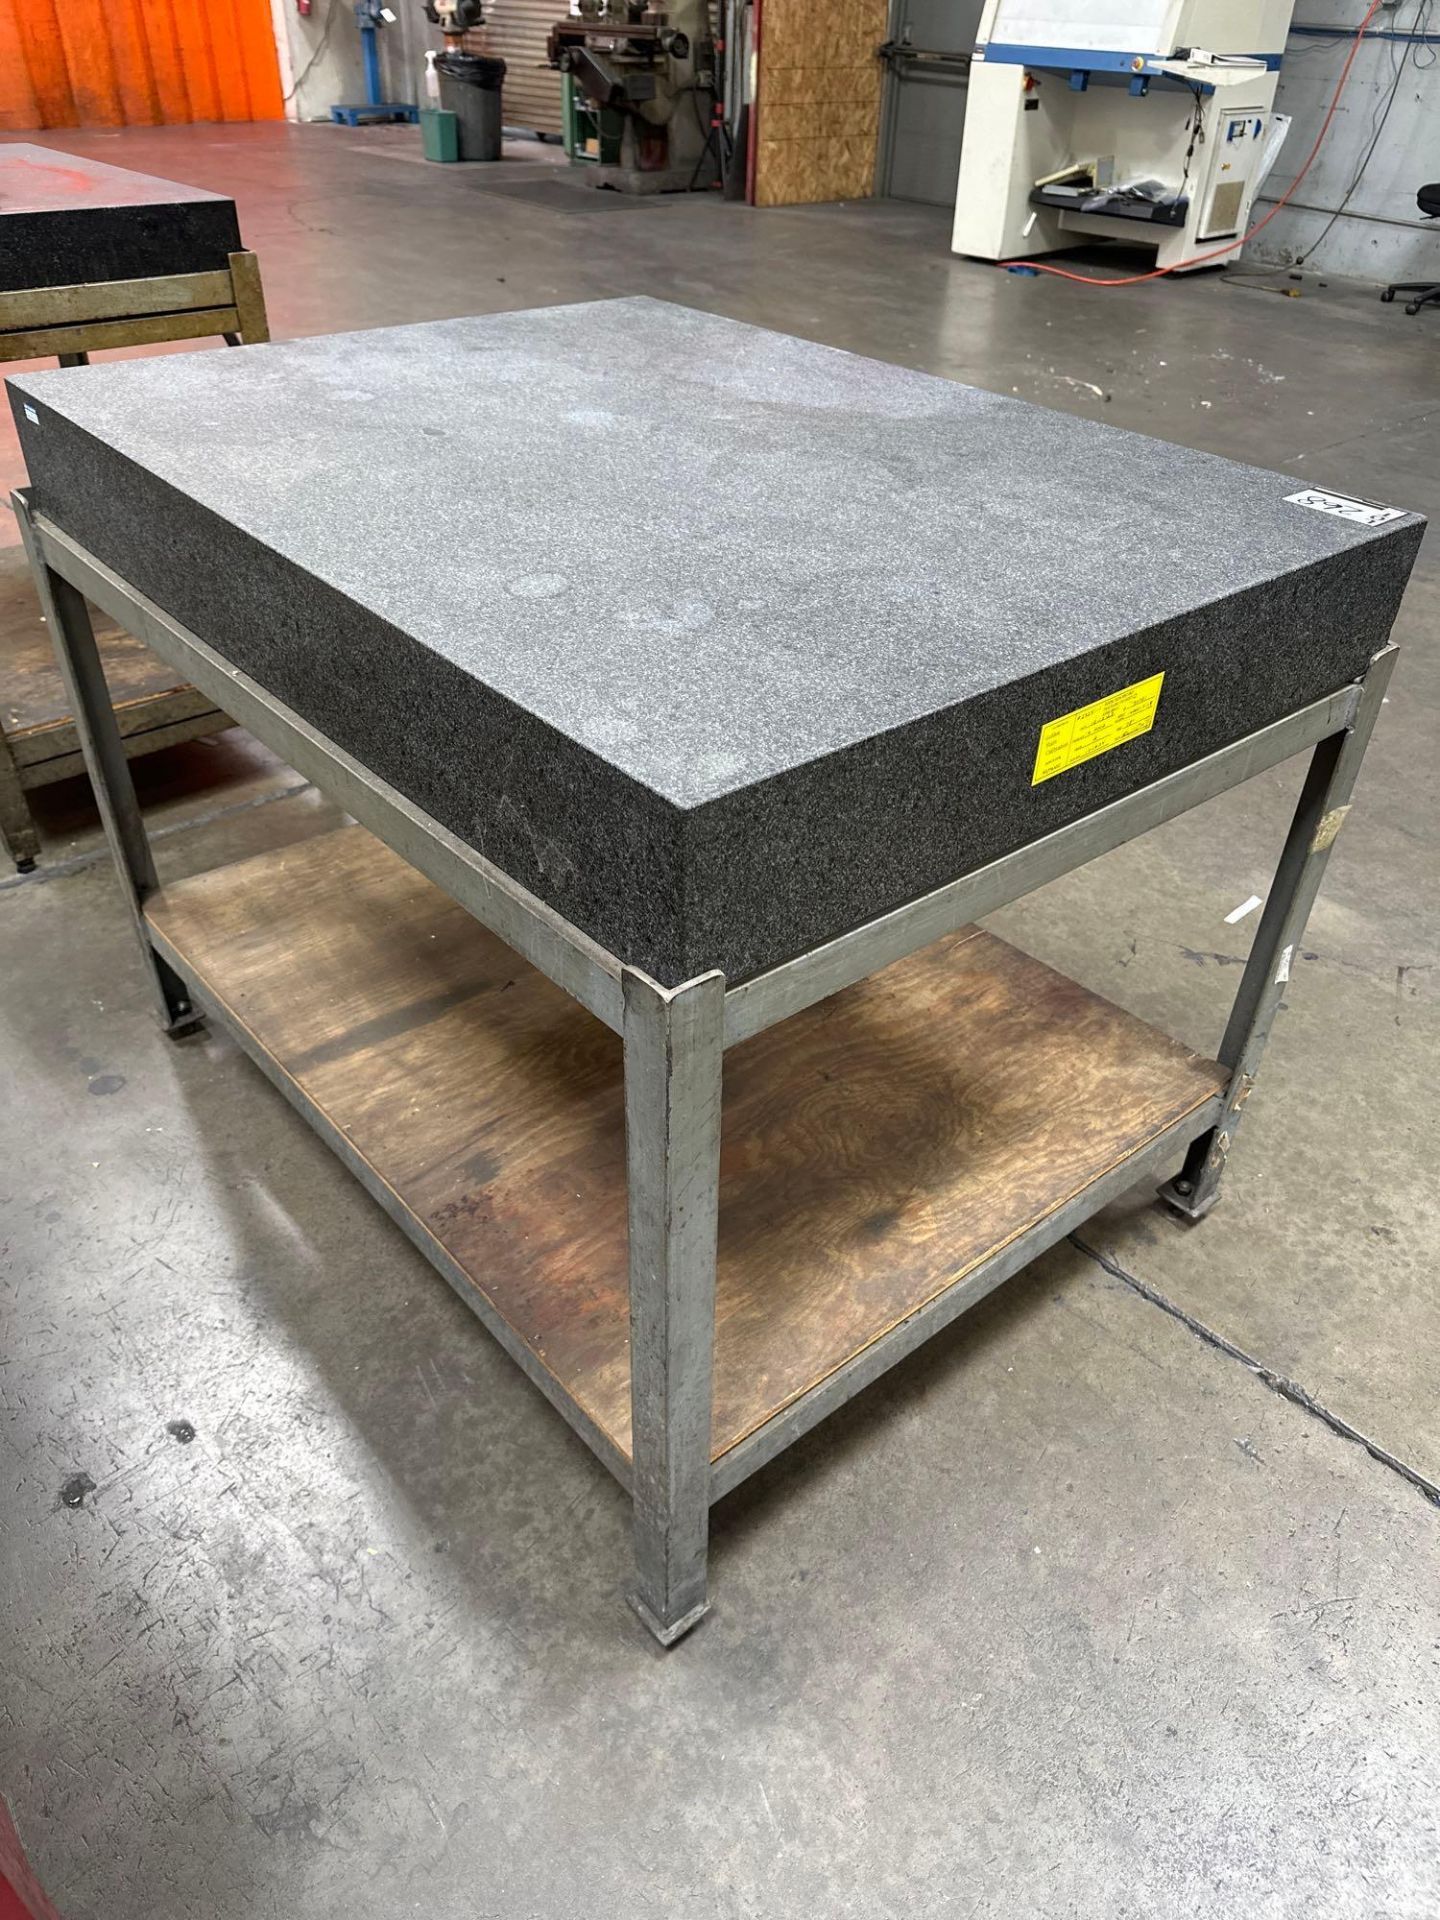 6” x 36” x 48” Grade A Granite Surface Plate w/ Steel Stand - Image 4 of 5